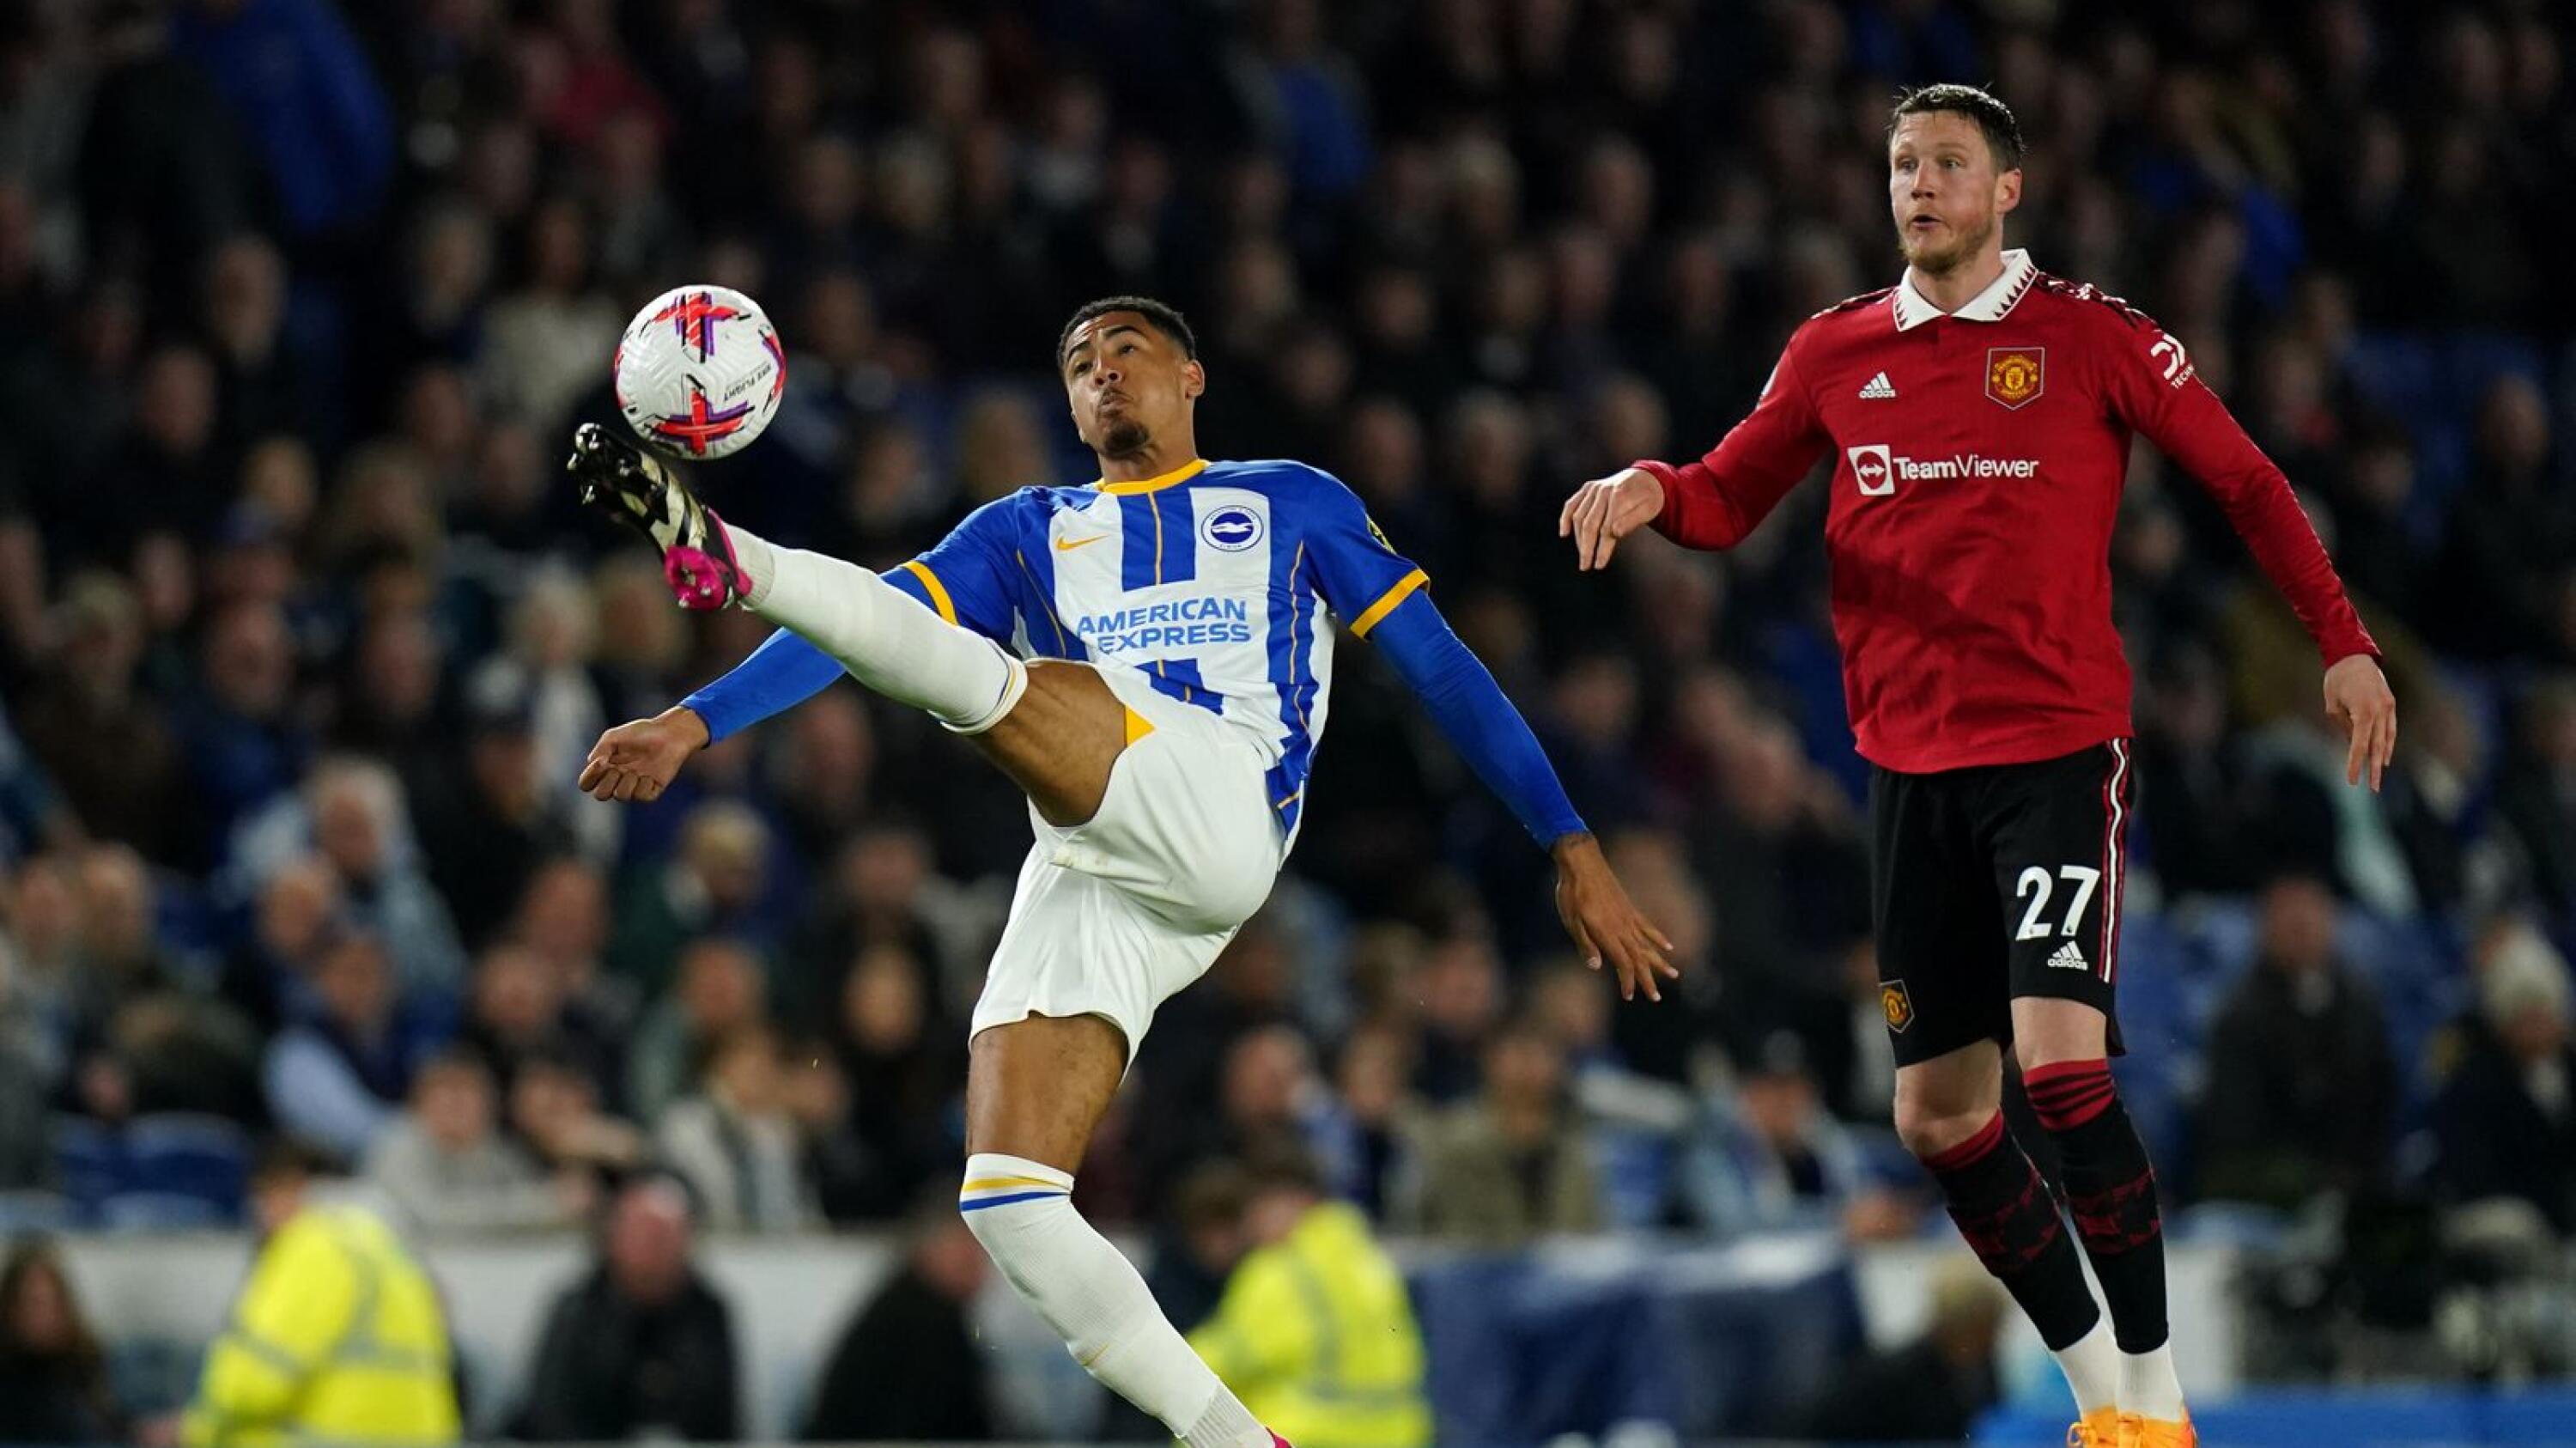 Brighton and Hove Albion's Levi Colwill (left) and Manchester United's Wout Weghorst in action during the Premier League match at the AMEX Stadium, Brighton